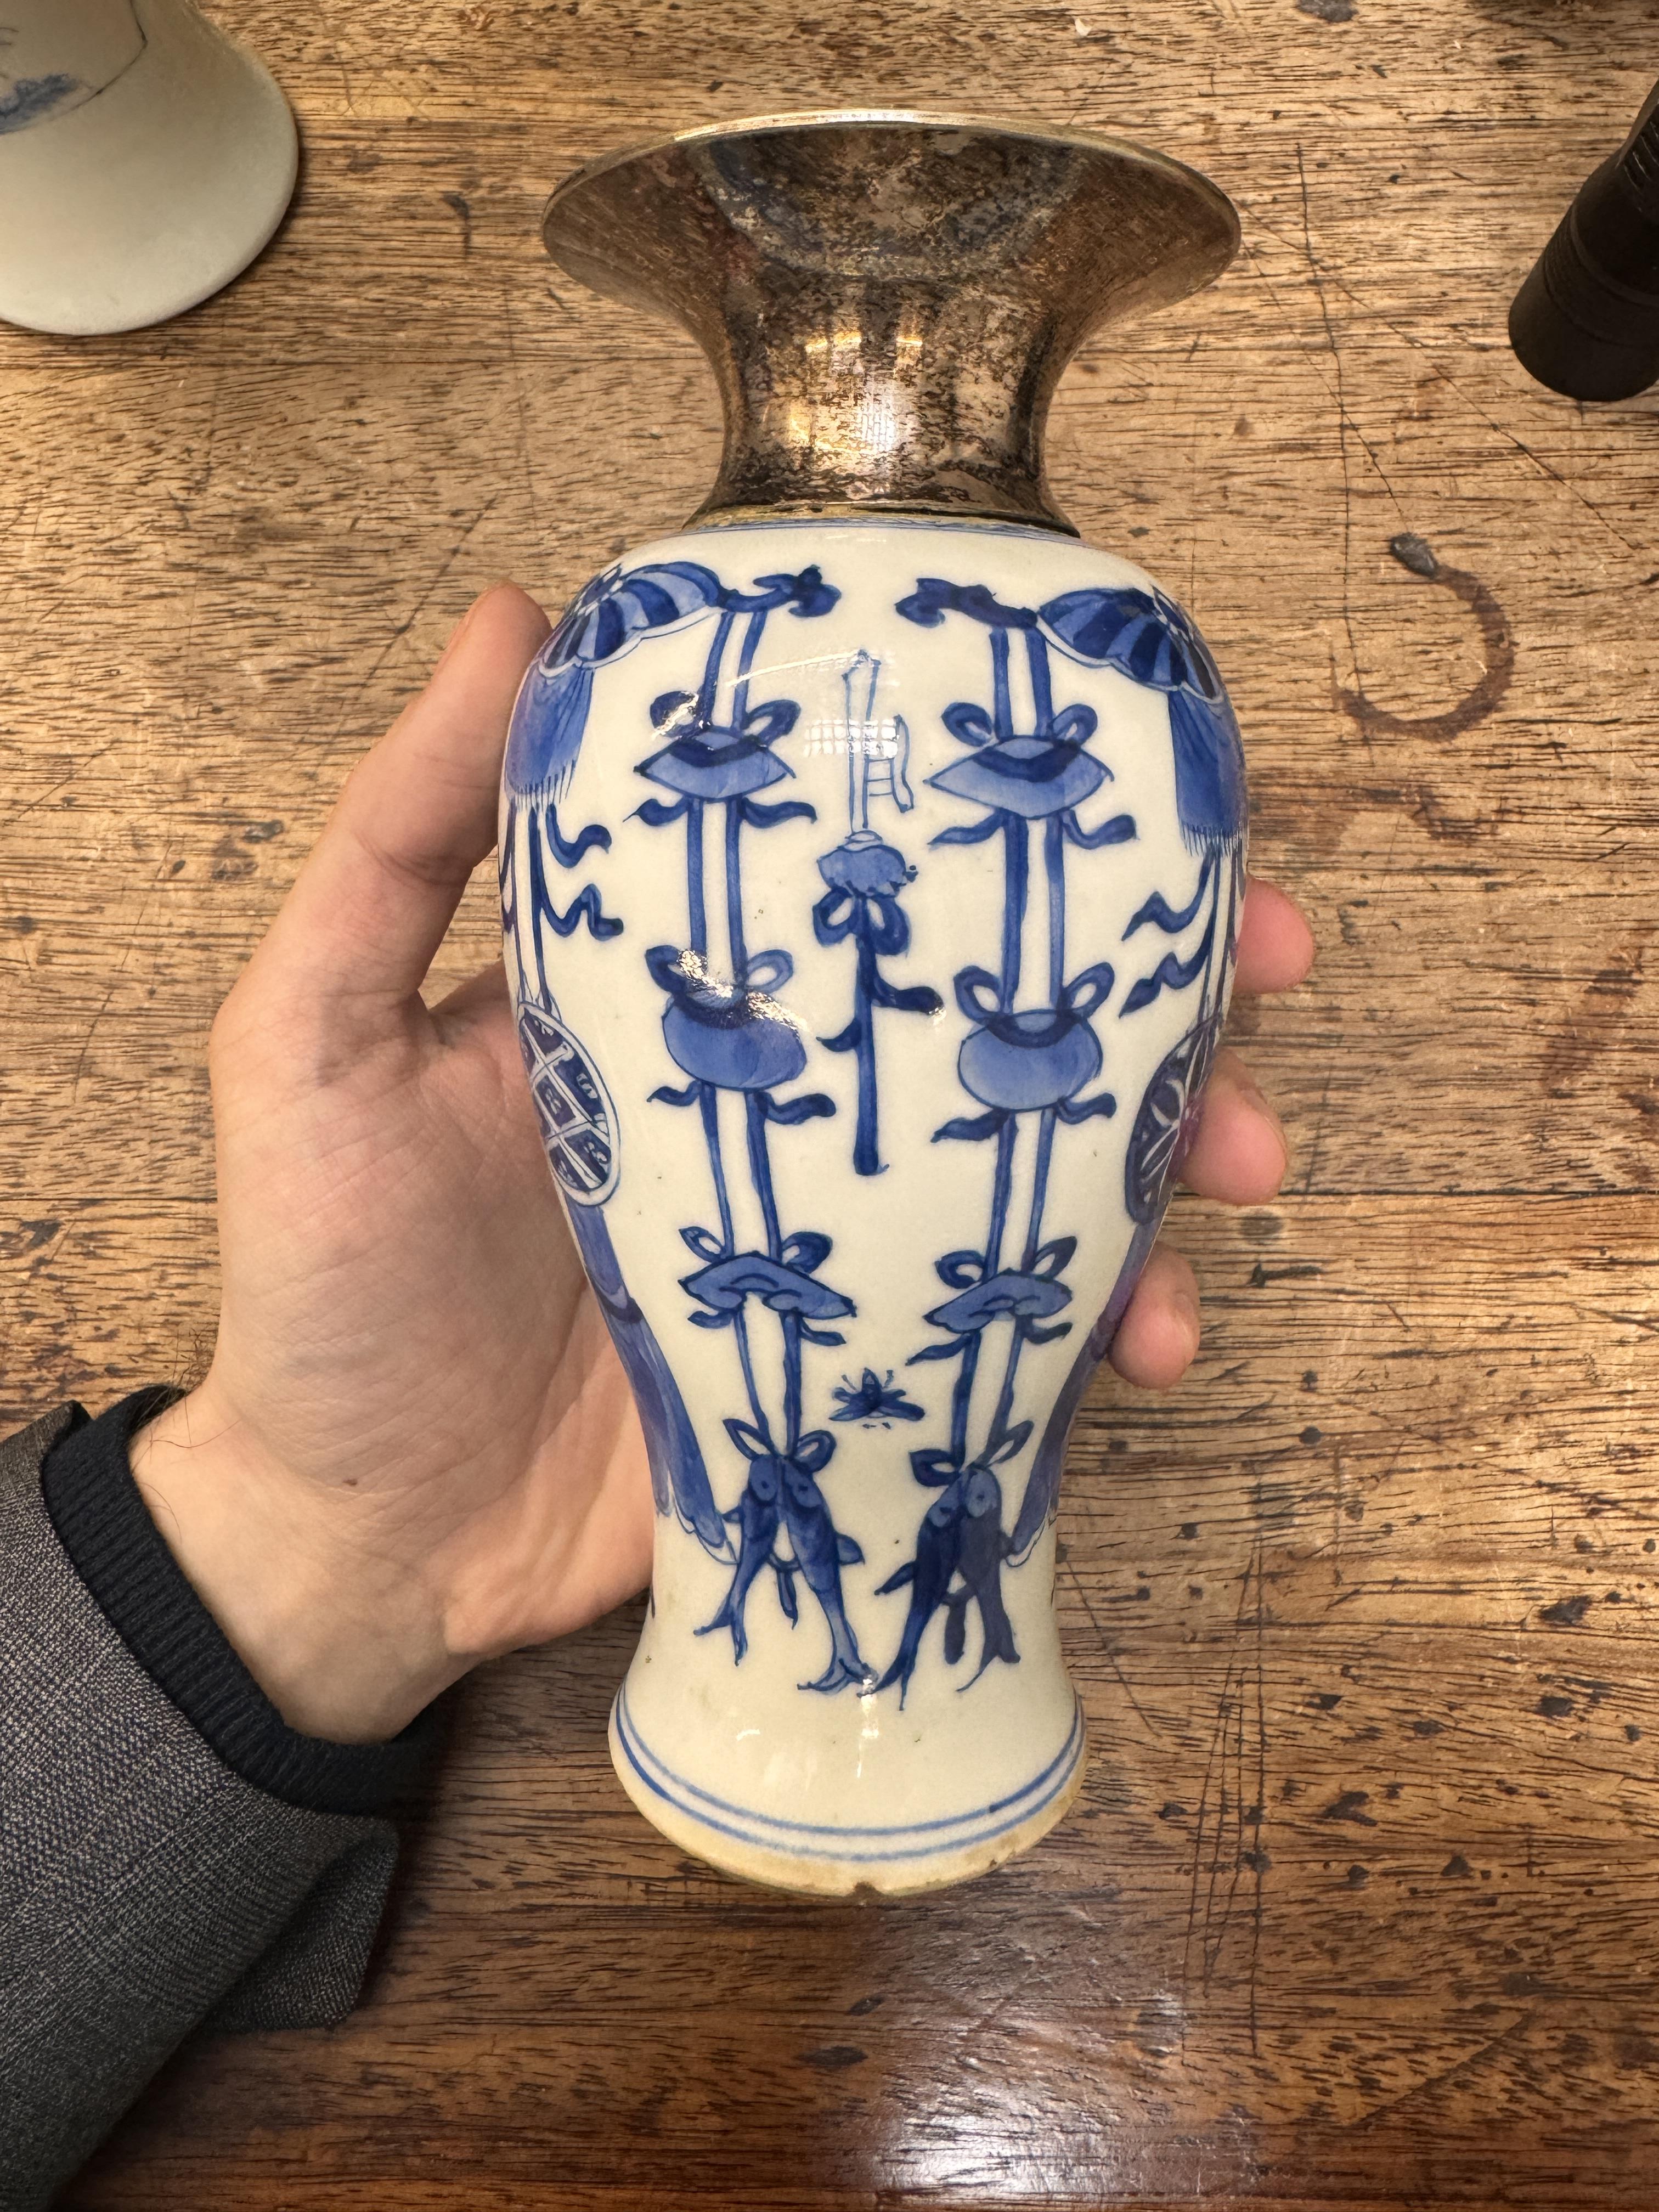 A CHINESE BLUE AND WHITE VASE 清康熙 青花雙魚紋瓶 - Image 11 of 17